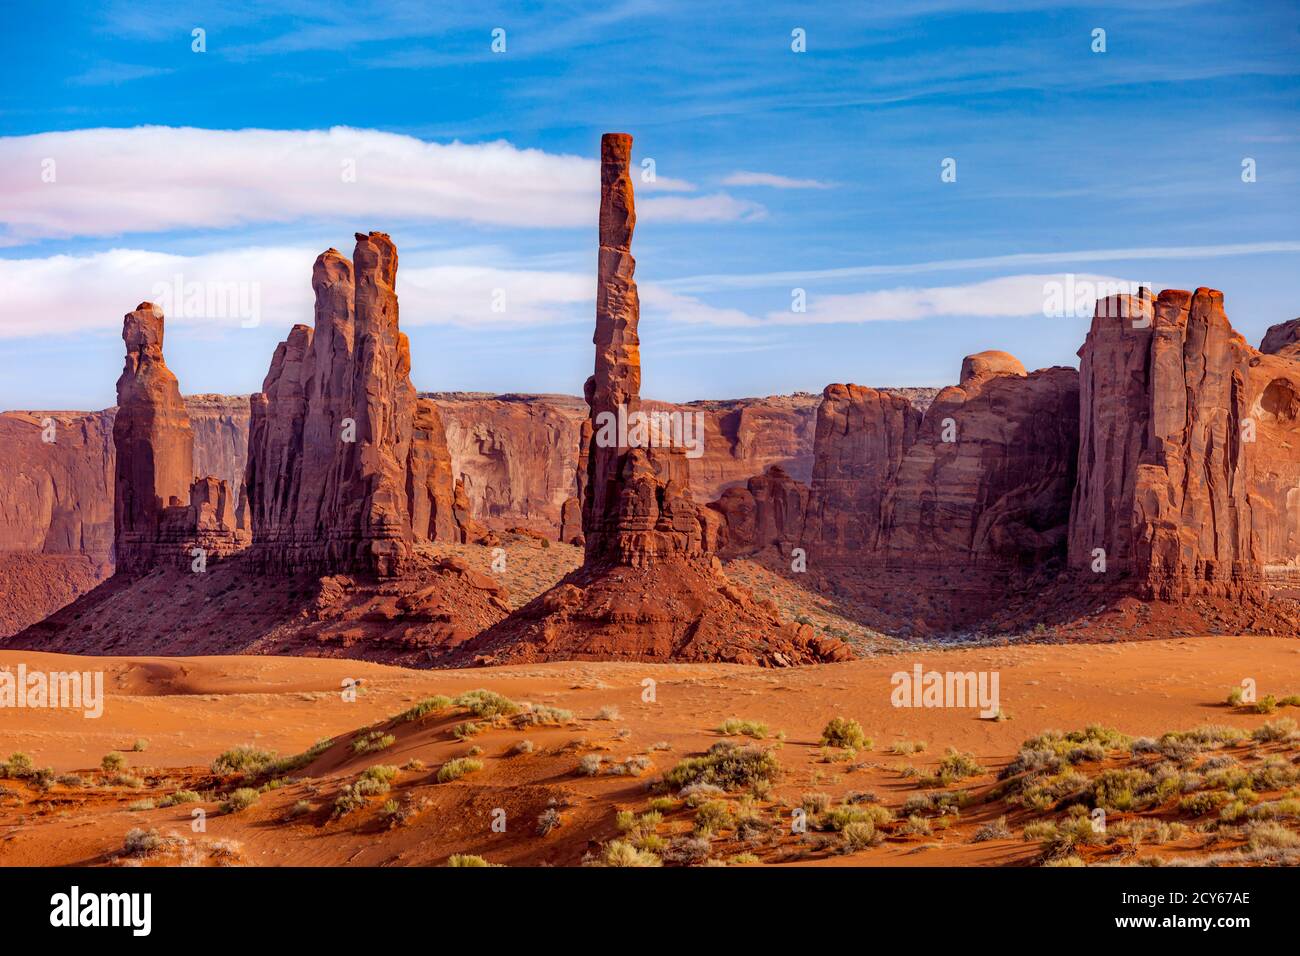 Yei Bei Chi Totem Poles - rock formations in Monument Valley, Navajo Tribal Park, Arizona, USA Stock Photo